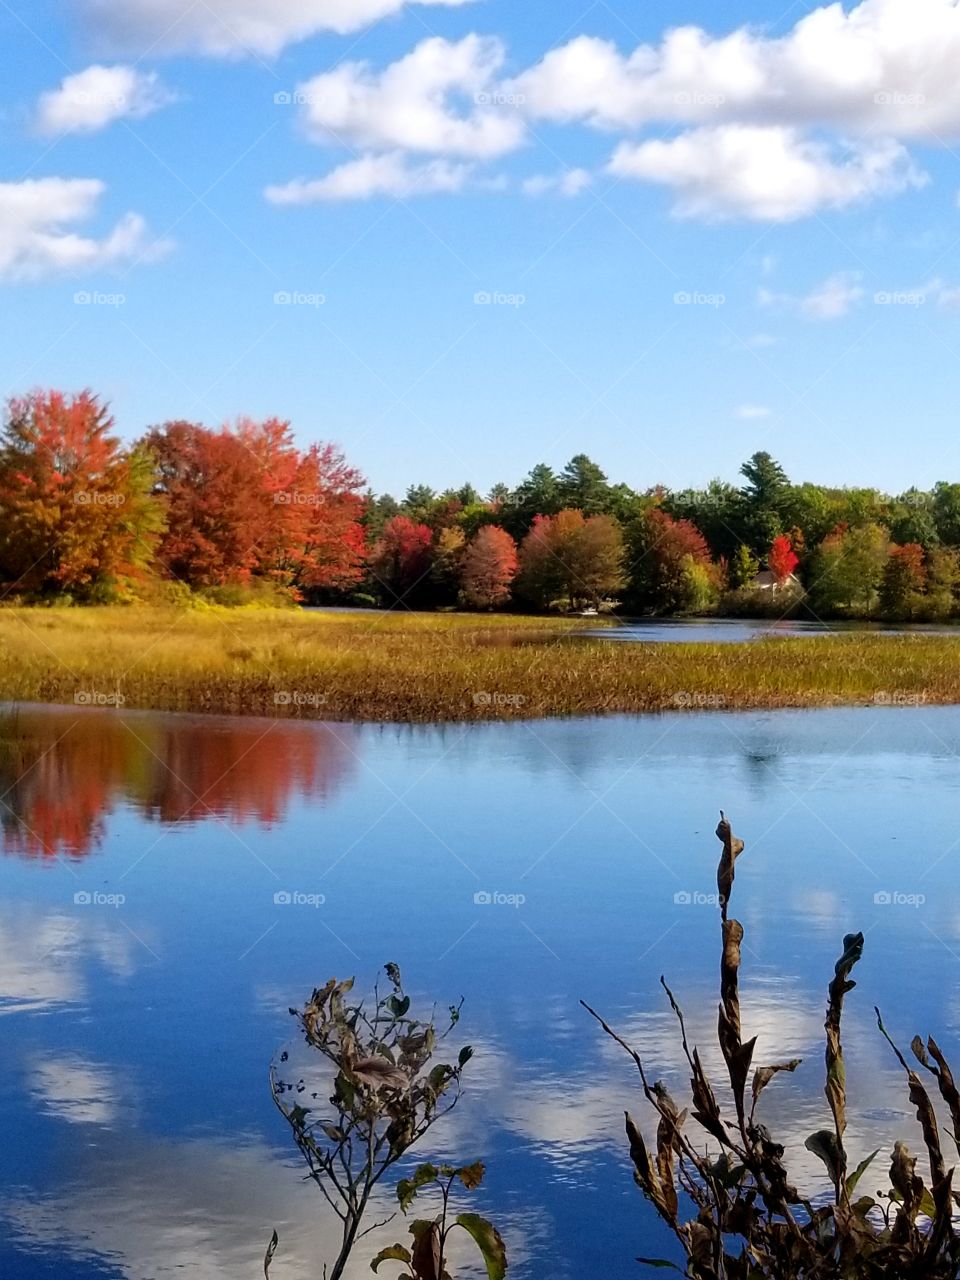 A Maine fall in it's prime